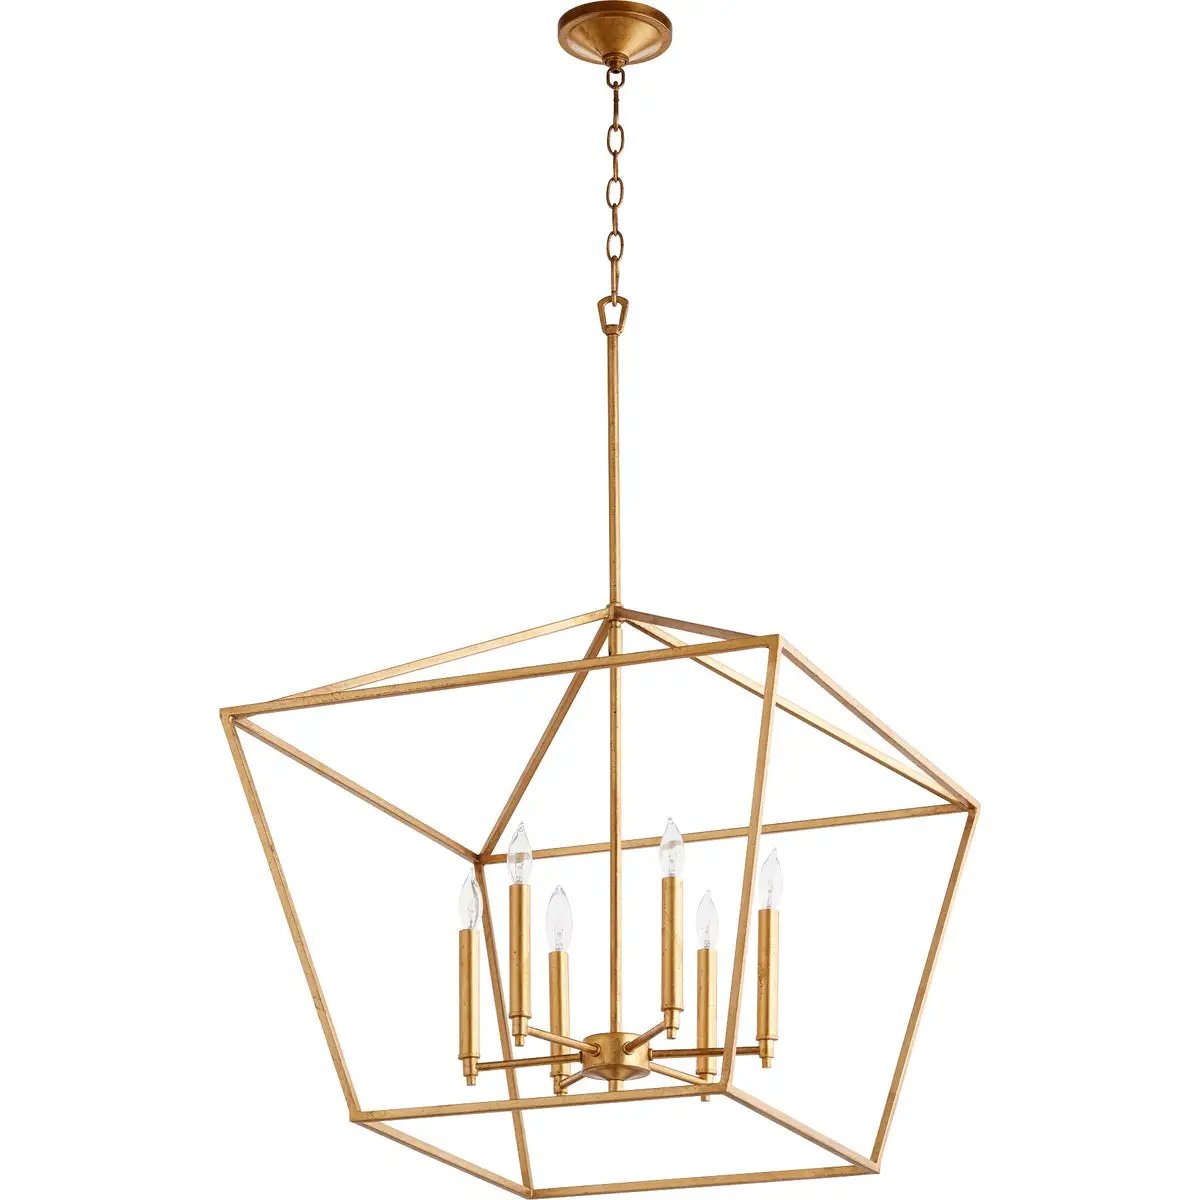 Farmhouse Pendant Light: A gold chandelier with lights, perfect for adding farmhouse charm. Open tapered shade provides ample illumination for foyer, hallway, or kitchen. Fits candelabra bulbs.